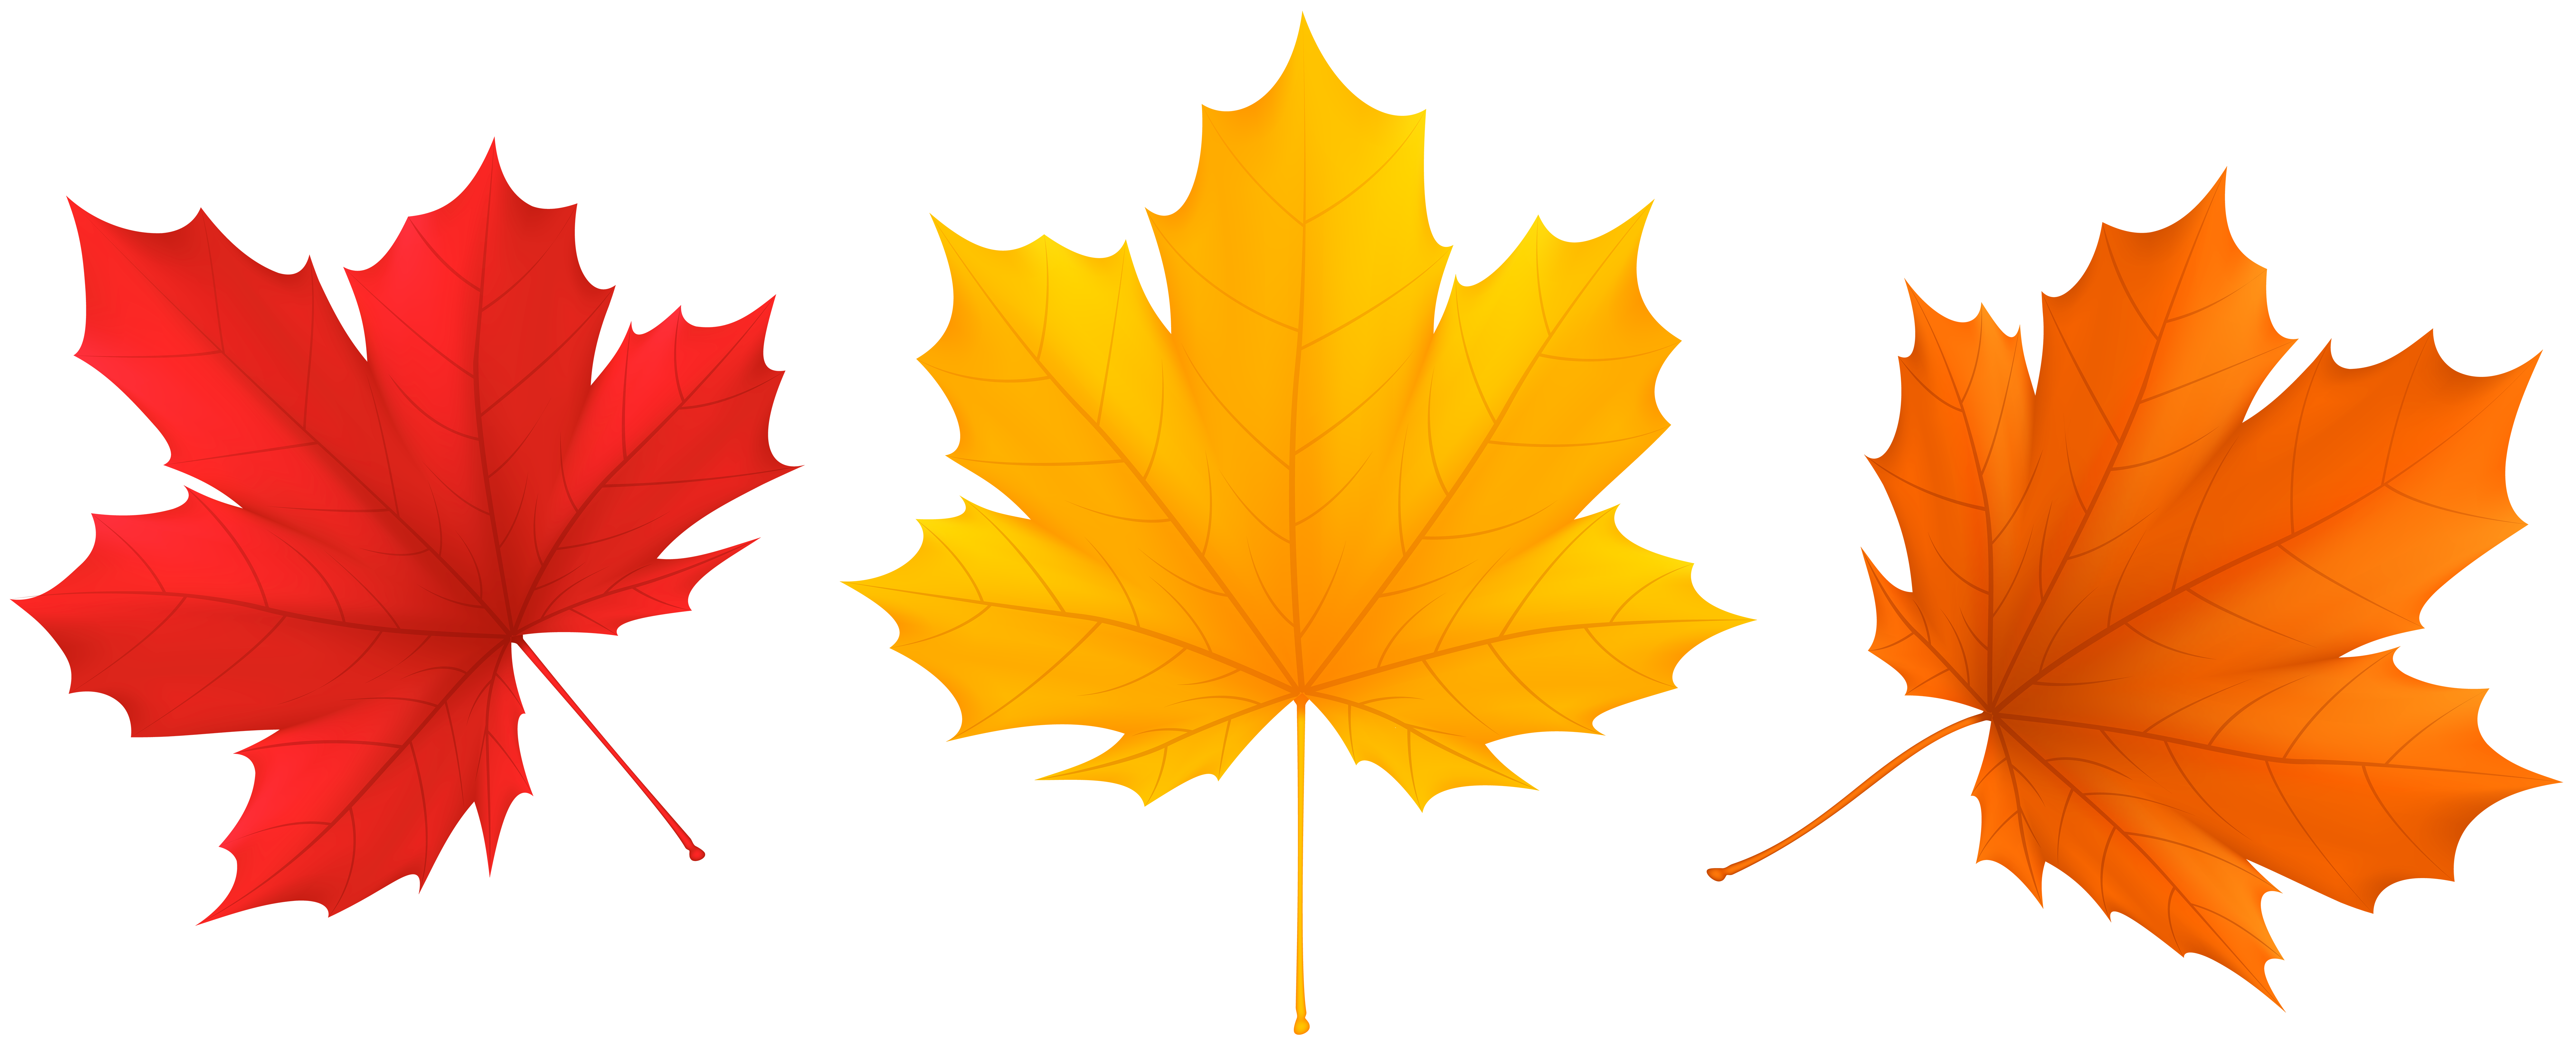 fall leaf clipart no background